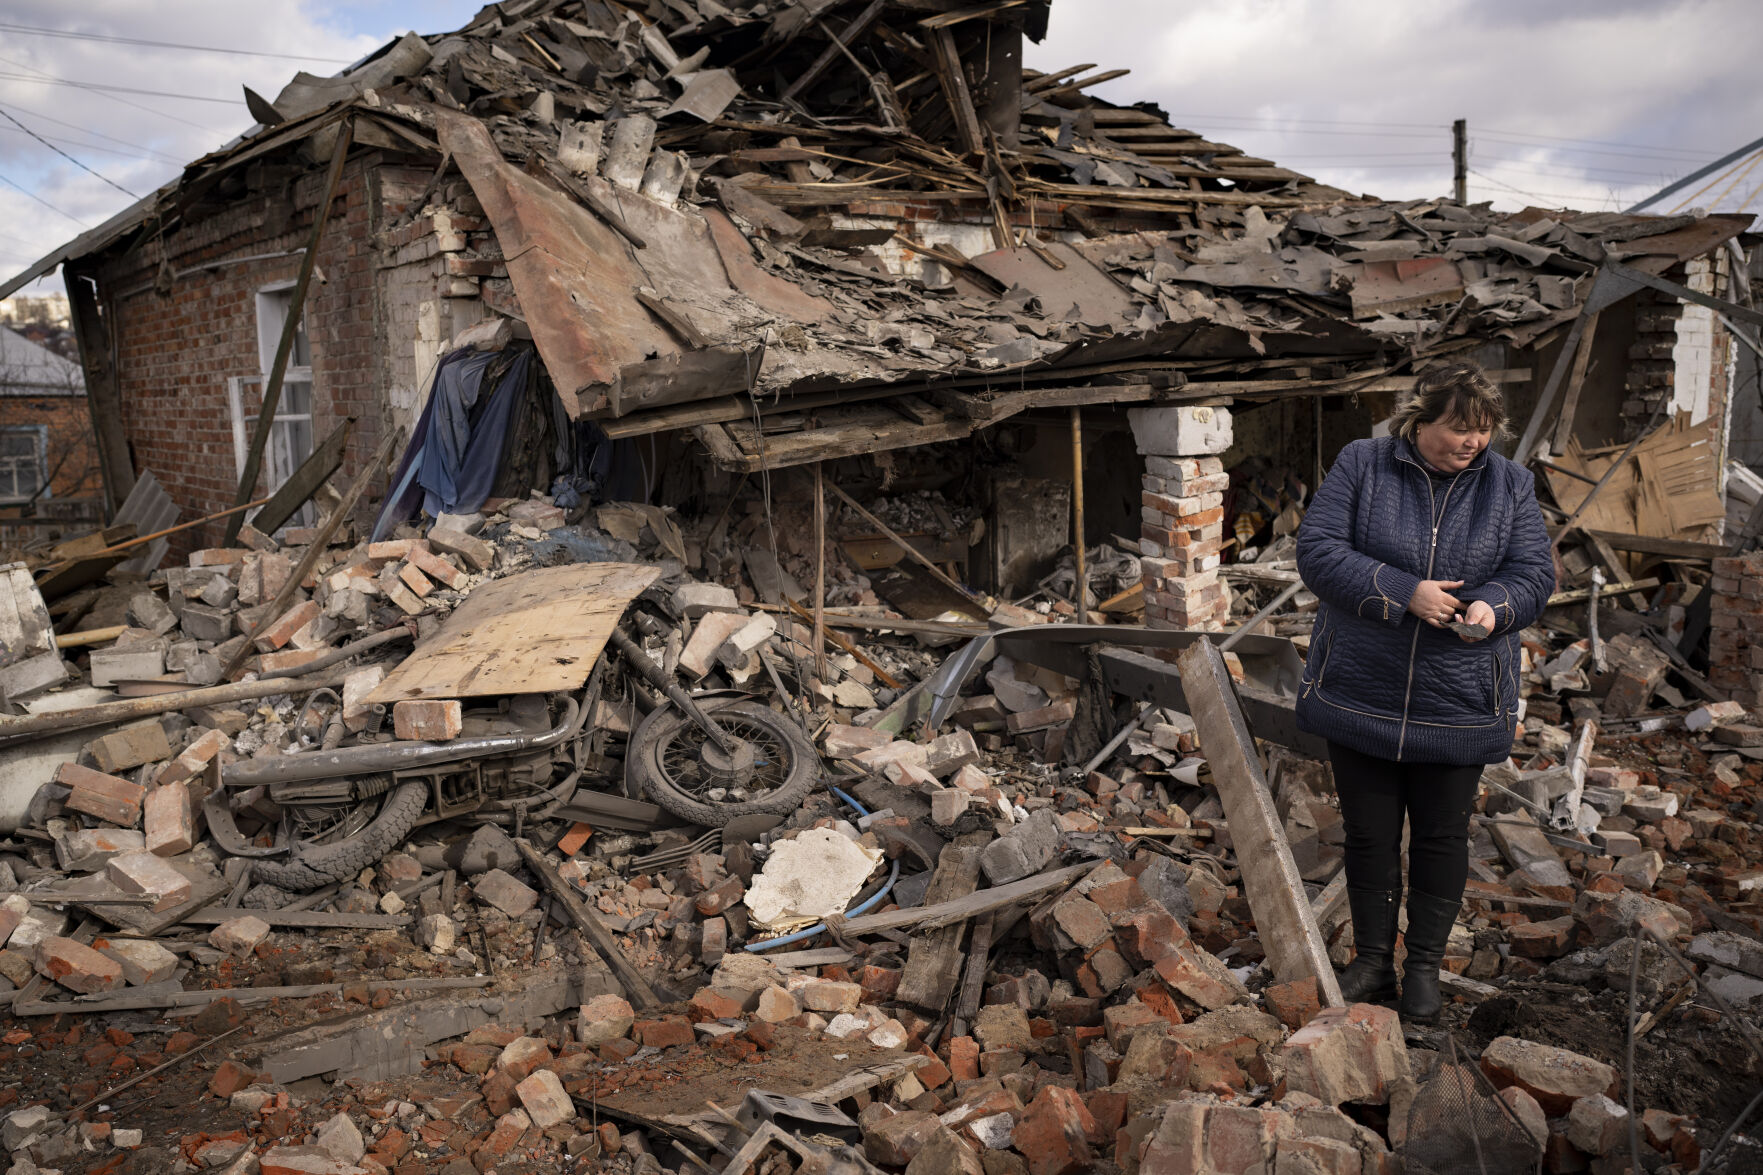 <p>FILE - A woman holds a piece of shrapnel standing in the rubble of a house where Ukrainian servicemen were sheltering which destroyed by a Russian S-300 rocket strike, in Kupiansk, Ukraine, Monday, Feb. 20, 2023. Grueling artillery battles have stepped up in recent weeks in the vicinity of Kupiansk, a strategic town on the eastern edge of Kharkiv province by the banks of the Oskil River as Russian attacks intensifying in a push to capture the entire industrial heartland known as the Donbas, which includes the Donetsk and the Luhansk provinces. (AP Photo/Vadim Ghirda, File)</p>   PHOTO CREDIT: Vadim Ghirda 